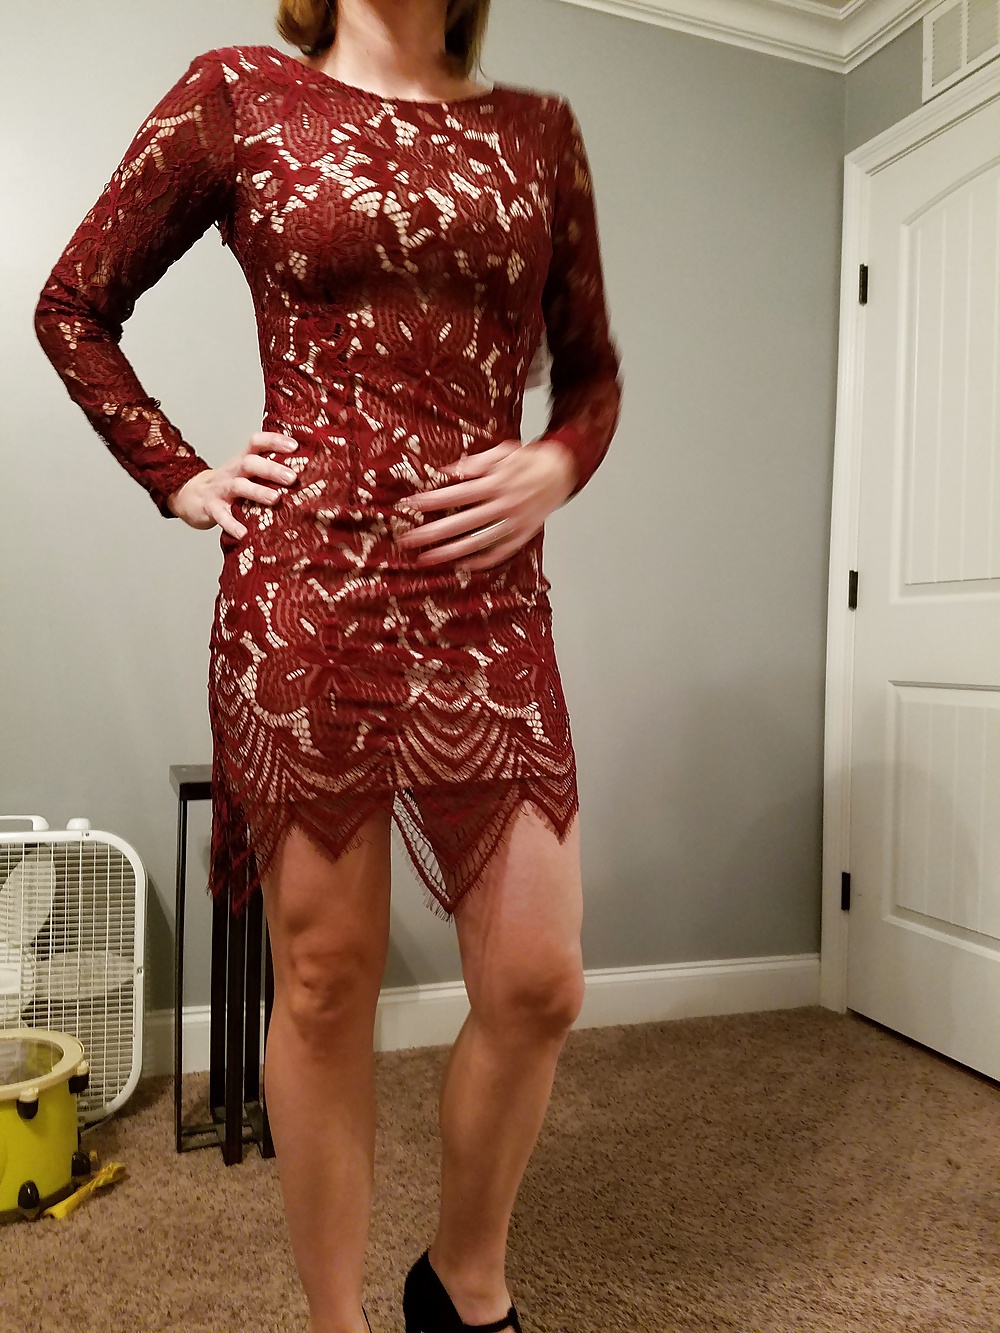 Hot_pawg_wifey_in_a_sexy_dress_ (4/14)